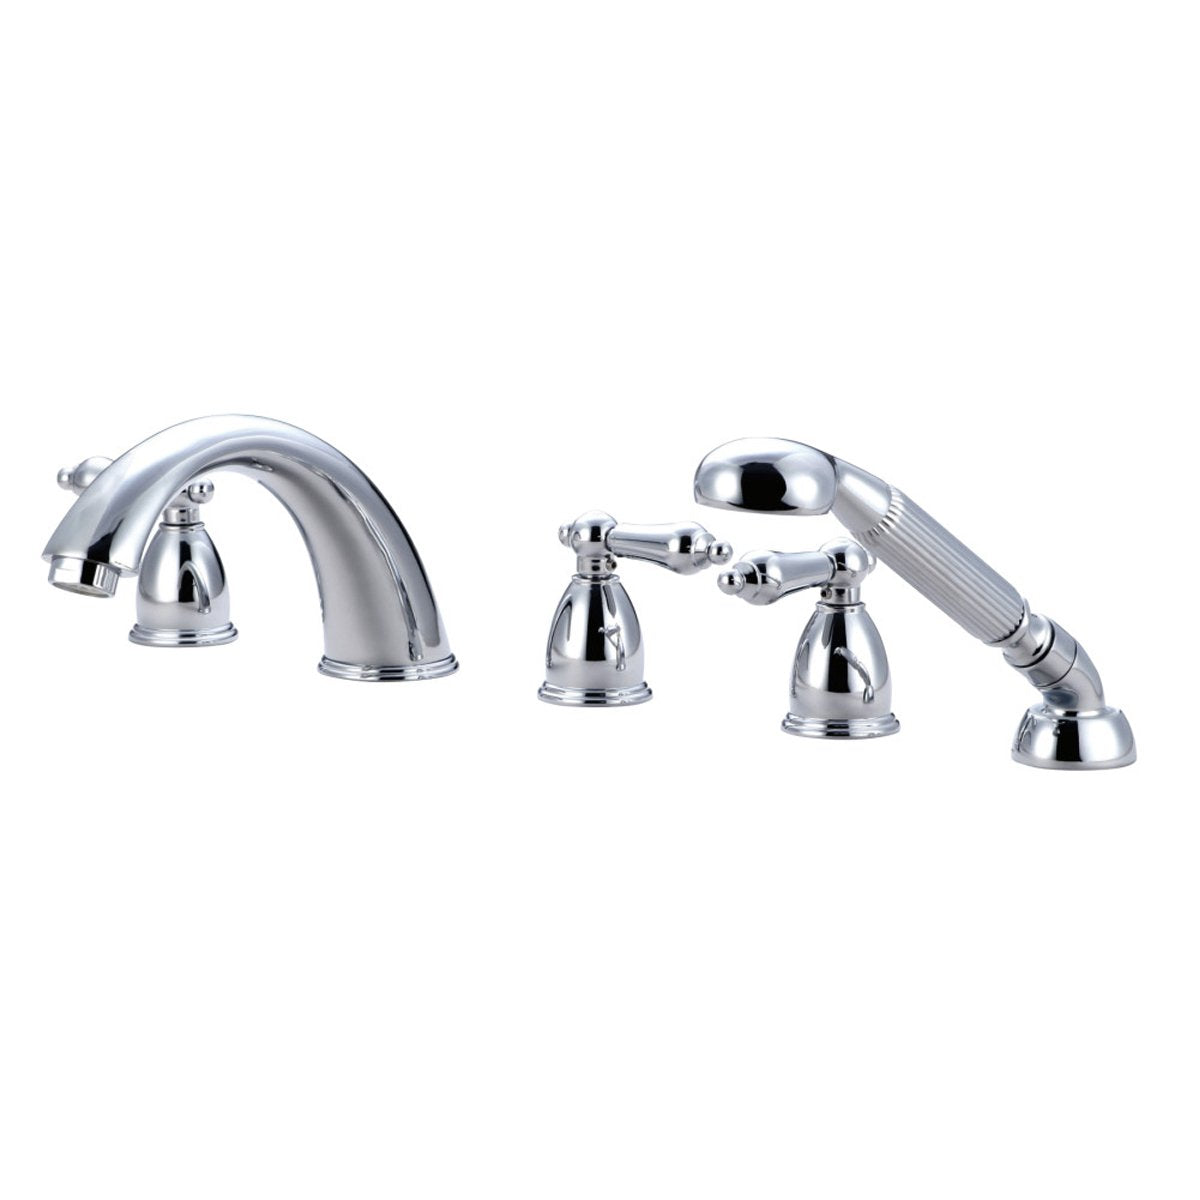 Kingston Brass Heritage 5 Piece Roman Tub Filler with Hand Shower